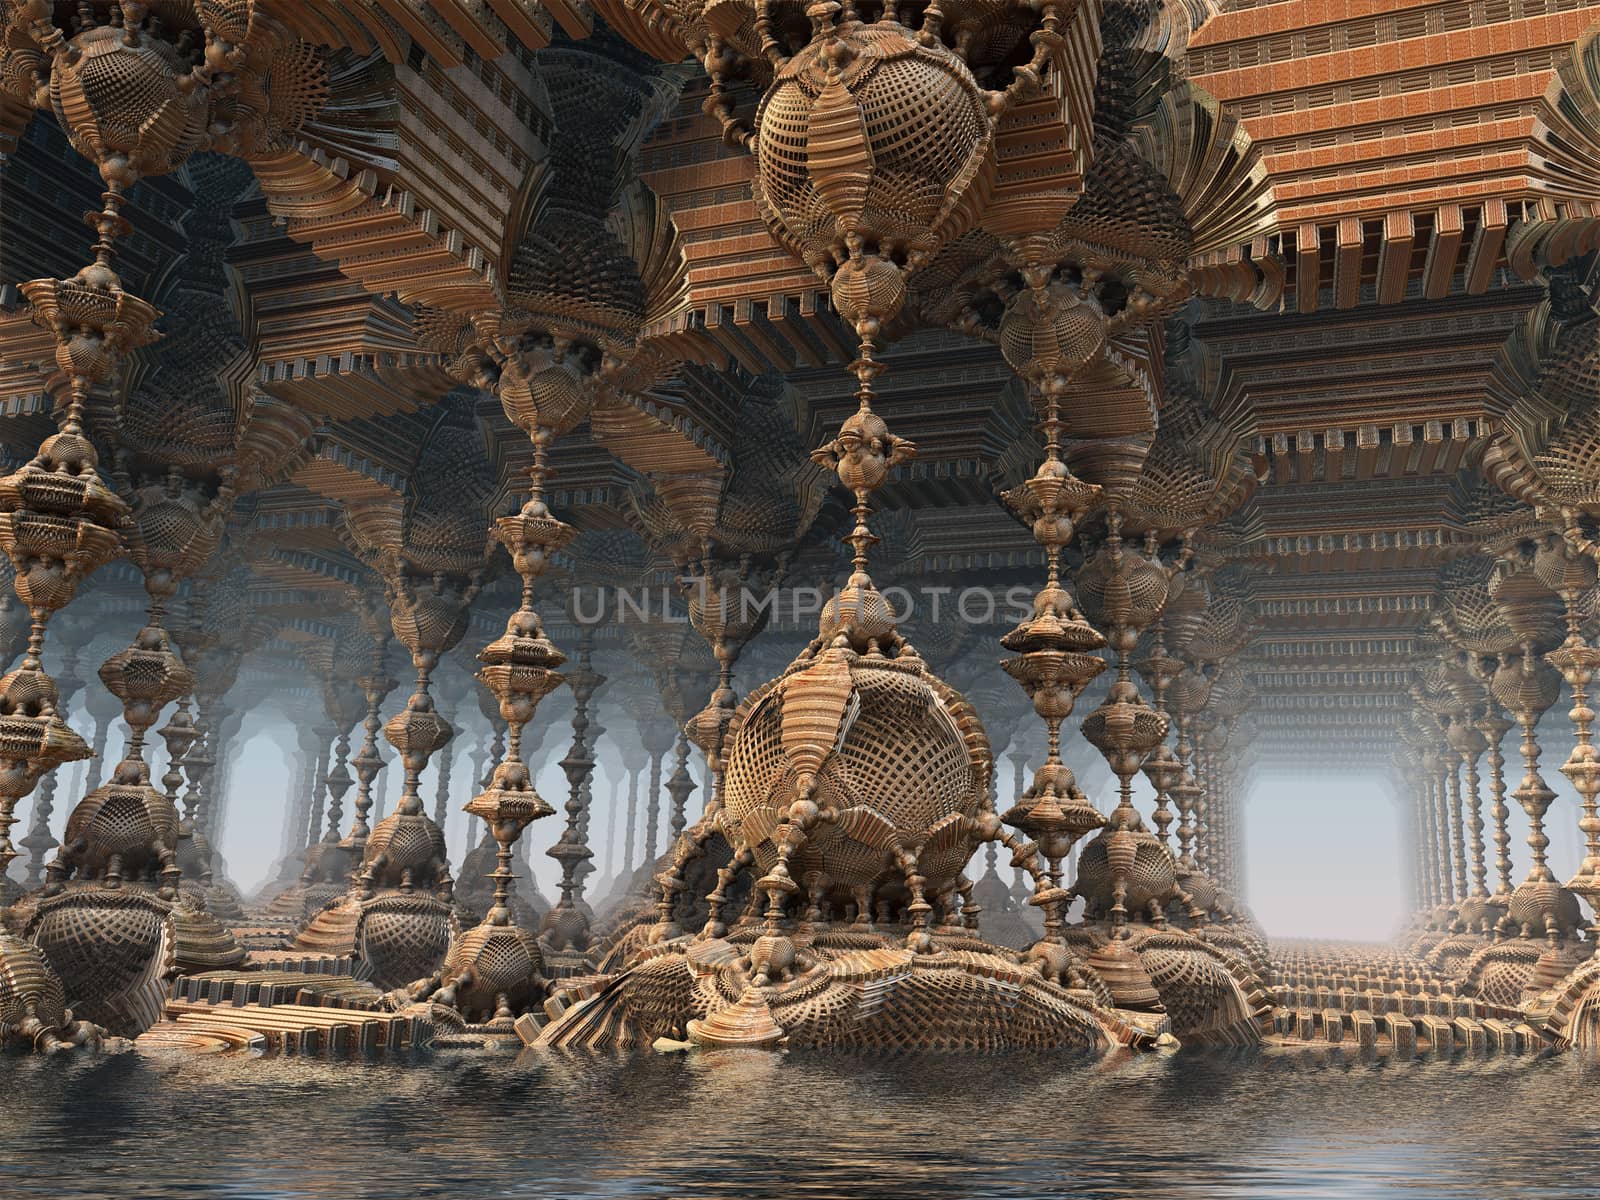 Computer rendered virtual scenery by stocklady